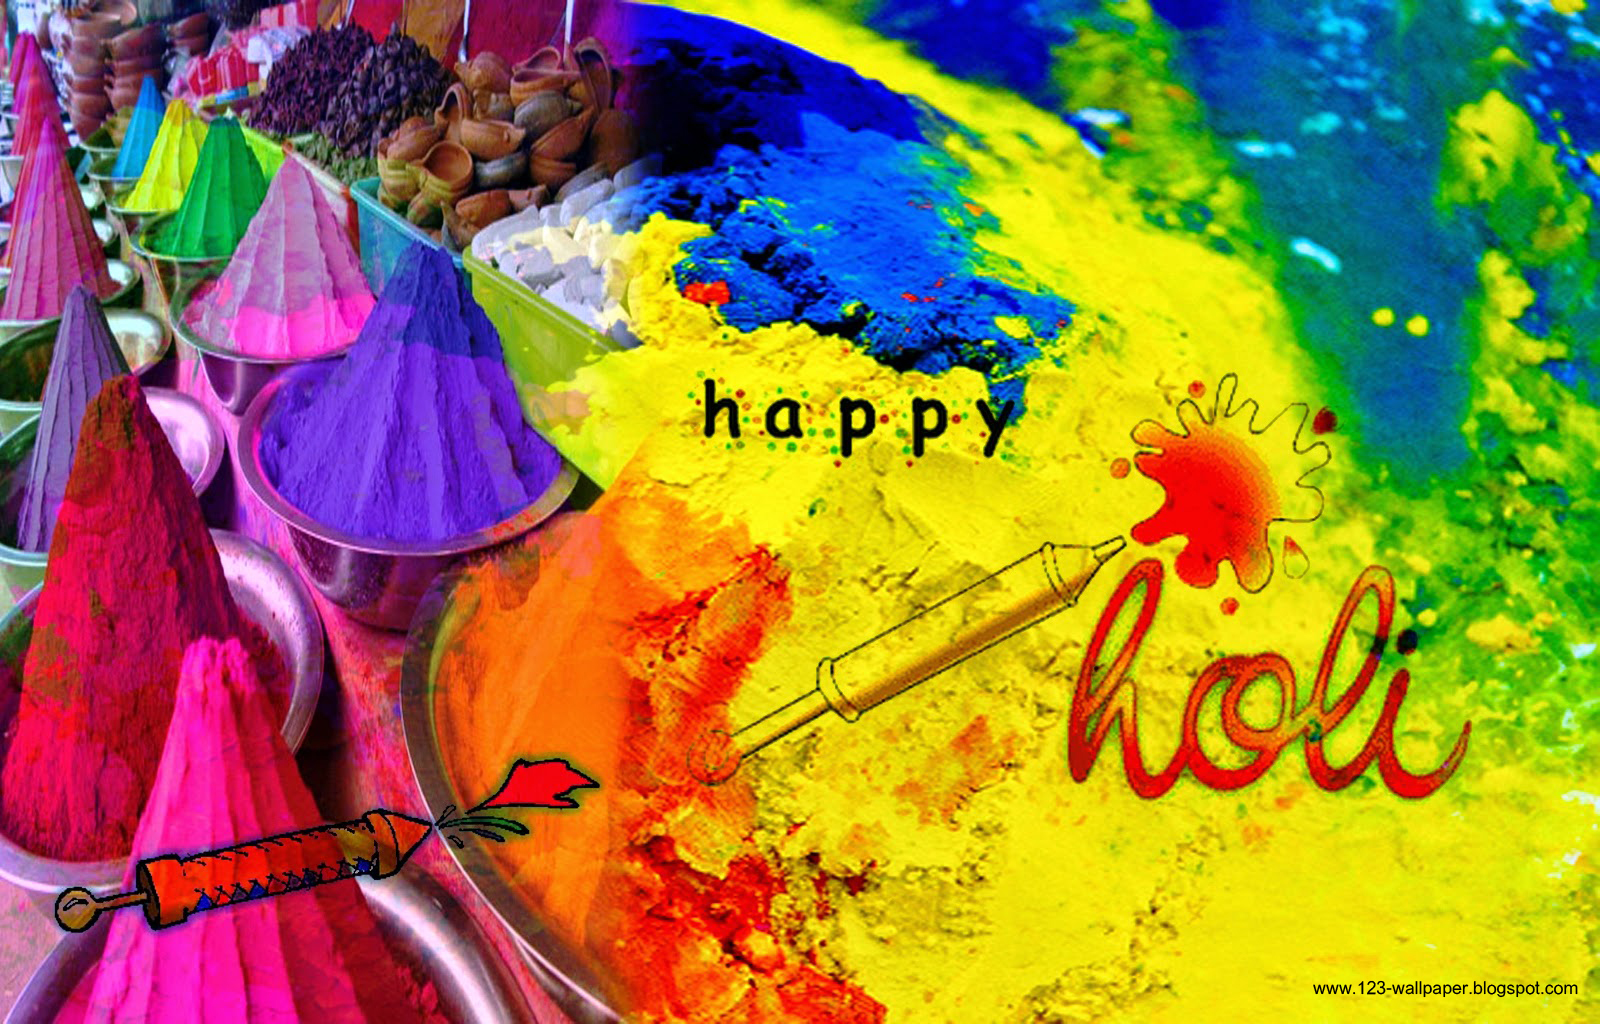 Happy Holi HD Wallpaper & SMS Messsages - Images of love